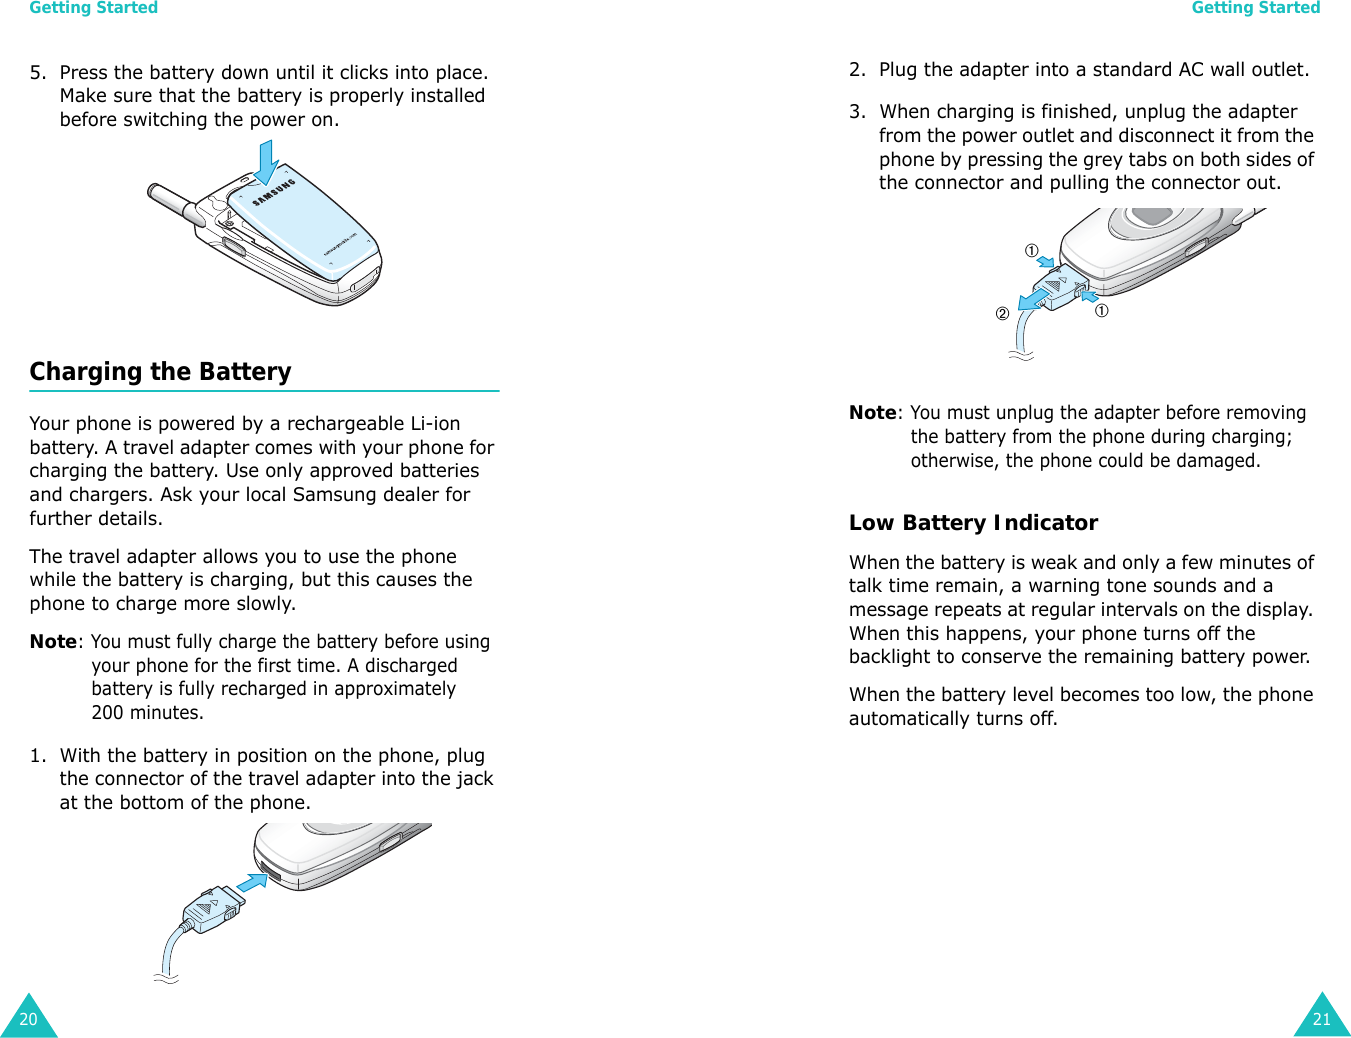 Getting Started205. Press the battery down until it clicks into place. Make sure that the battery is properly installed before switching the power on. Charging the BatteryYour phone is powered by a rechargeable Li-ion battery. A travel adapter comes with your phone for charging the battery. Use only approved batteries and chargers. Ask your local Samsung dealer for further details.The travel adapter allows you to use the phone while the battery is charging, but this causes the phone to charge more slowly. Note: You must fully charge the battery before using your phone for the first time. A discharged battery is fully recharged in approximately 200 minutes.1. With the battery in position on the phone, plug the connector of the travel adapter into the jack at the bottom of the phone. Getting Started212. Plug the adapter into a standard AC wall outlet.3. When charging is finished, unplug the adapter from the power outlet and disconnect it from the phone by pressing the grey tabs on both sides of the connector and pulling the connector out.Note: You must unplug the adapter before removing the battery from the phone during charging; otherwise, the phone could be damaged.Low Battery IndicatorWhen the battery is weak and only a few minutes of talk time remain, a warning tone sounds and a message repeats at regular intervals on the display. When this happens, your phone turns off the backlight to conserve the remaining battery power.When the battery level becomes too low, the phone automatically turns off.➀➀➁